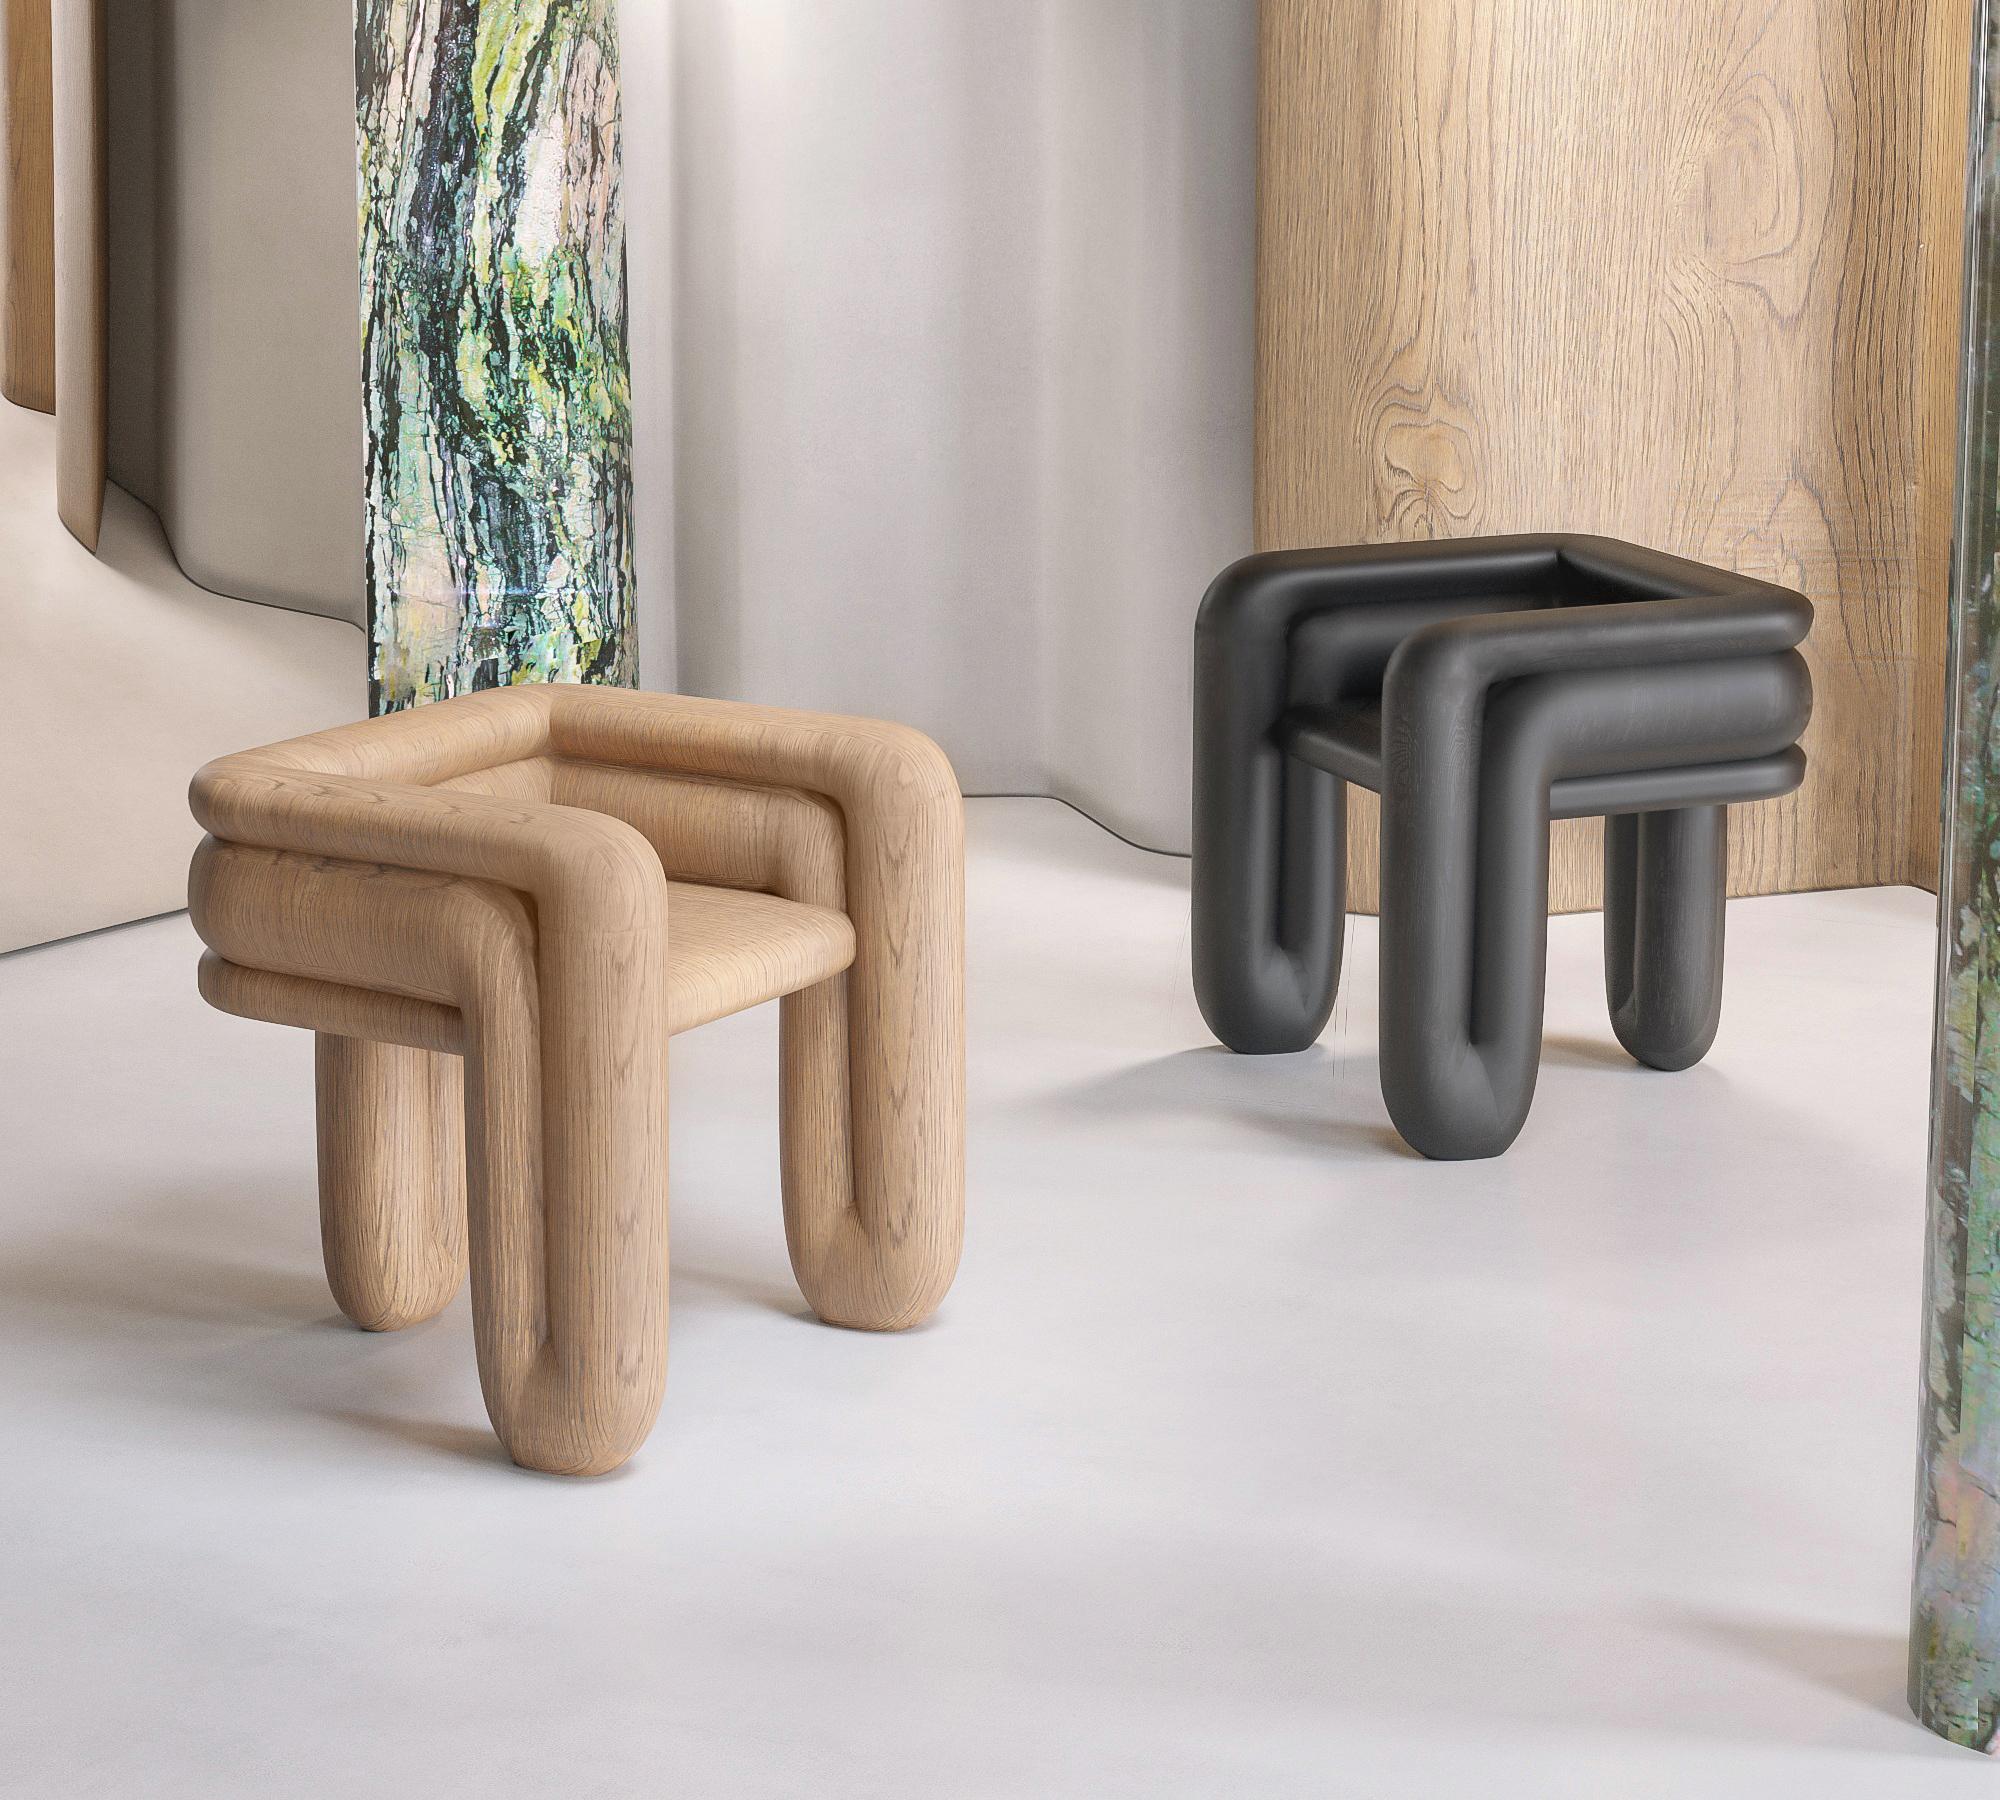 Enigma Black Wood Accent Chair by Alter Ego Studio


Dimensions
W 81 cm 
D 66 cm
H  41 cm

Product features
Structure in Wood

Product options:

Wood finishes:
Available in all Alter Ego Studio wood swatches.